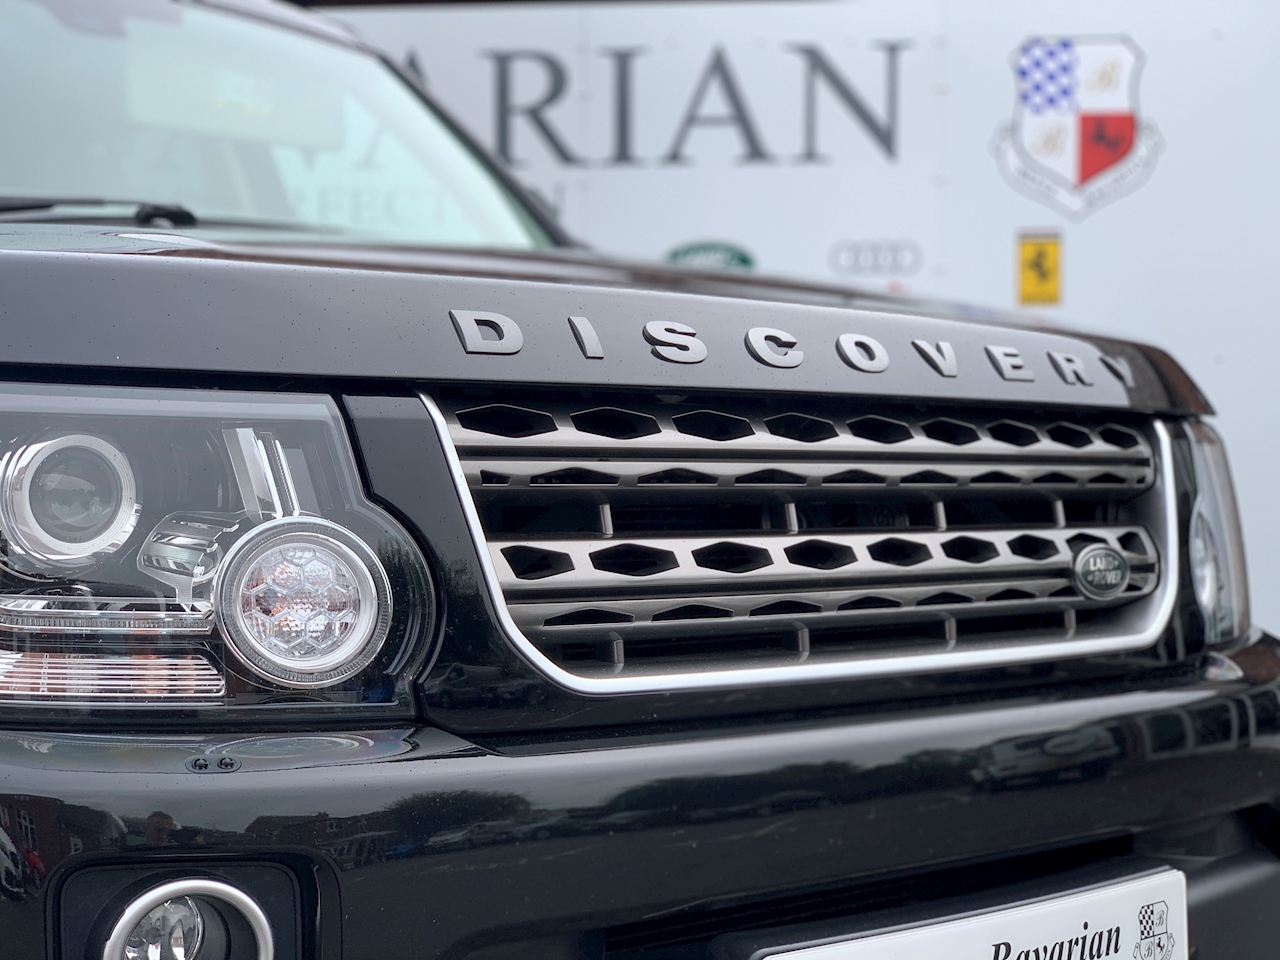 Discovery 4 Graphite SUV 3.0 Automatic Diesel